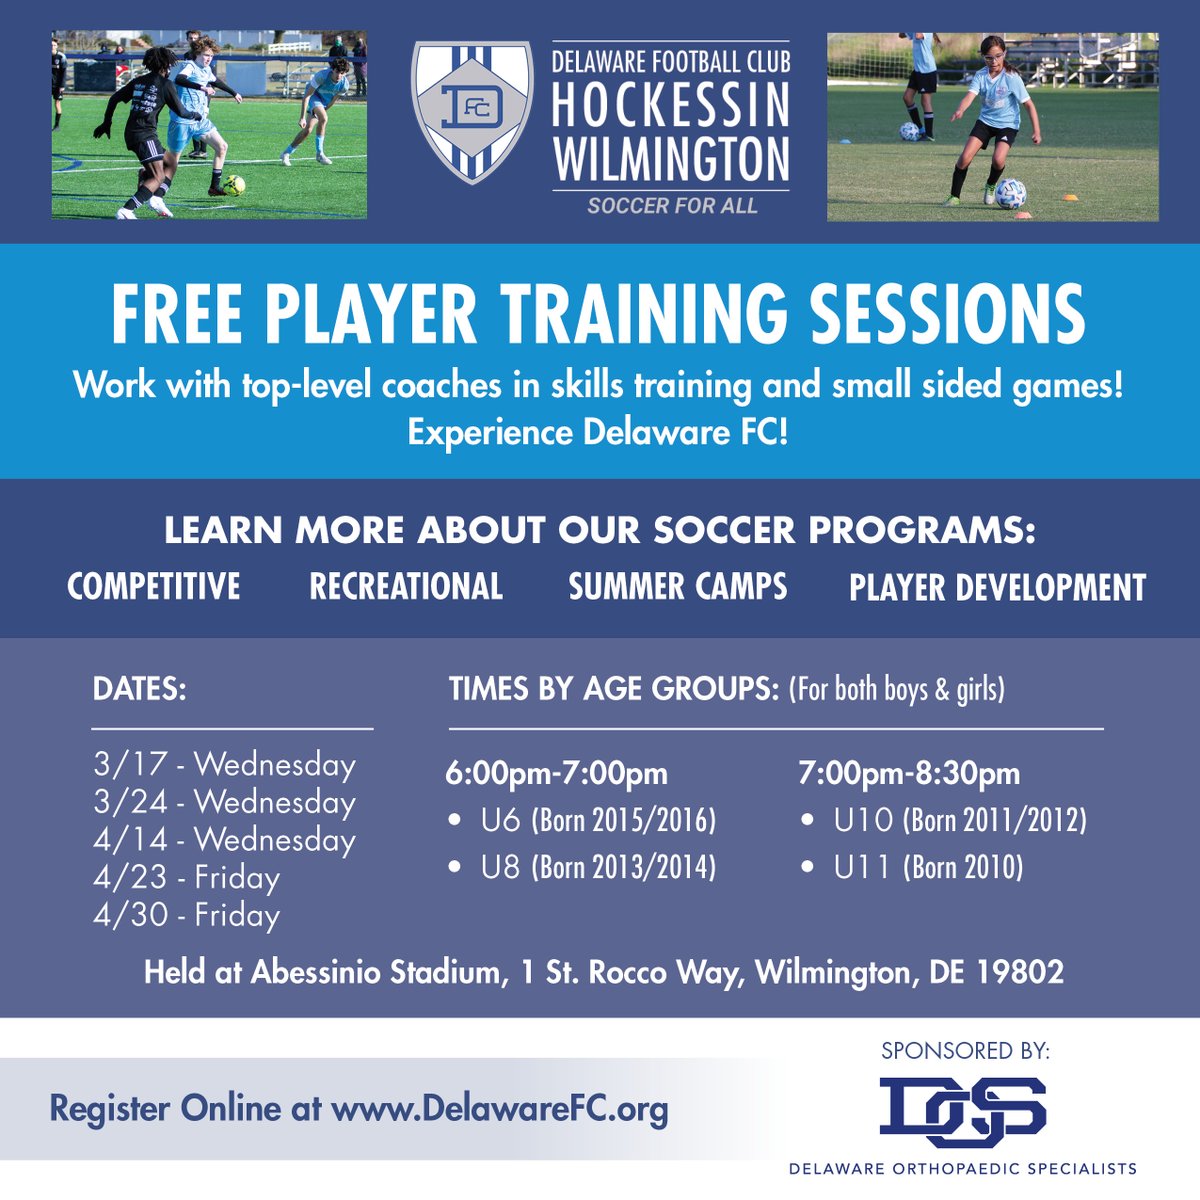 FREE TRAINING SESSIONS begin this week! We're expanding our training opportunities into Wilmington with our upcoming free training sessions at @salesianumschool's beautiful new #AbessinioStadium. docs.google.com/forms/d/e/1FAI… @defcwilmington